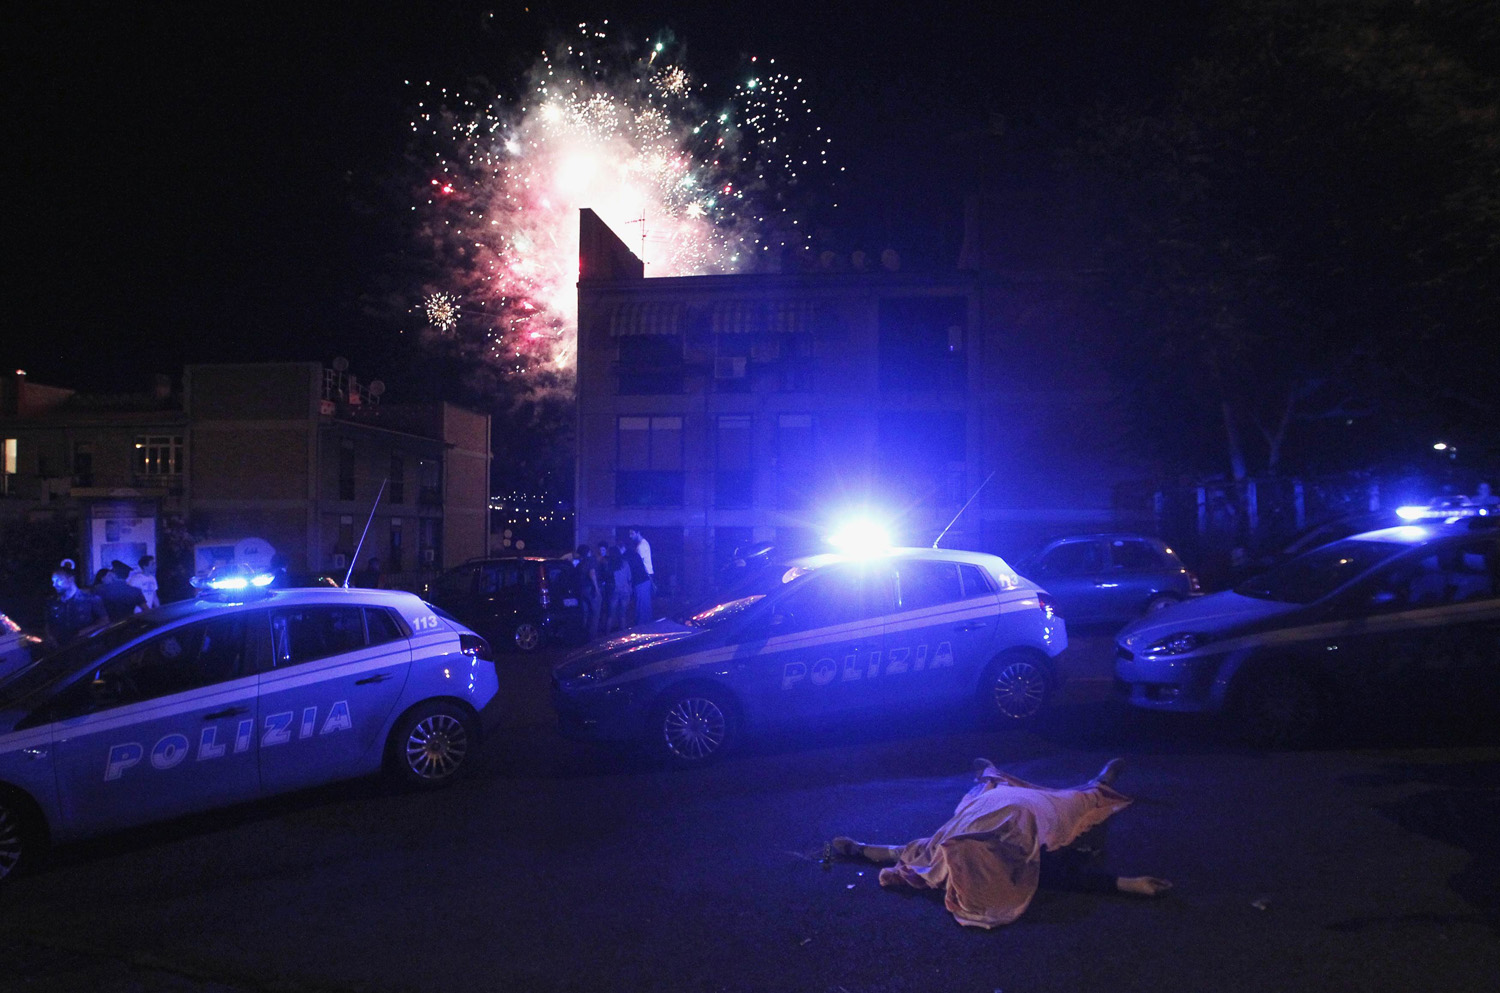 Police patrol area around man killed after shooting, as fireworks are set off at local party in background, in Naples